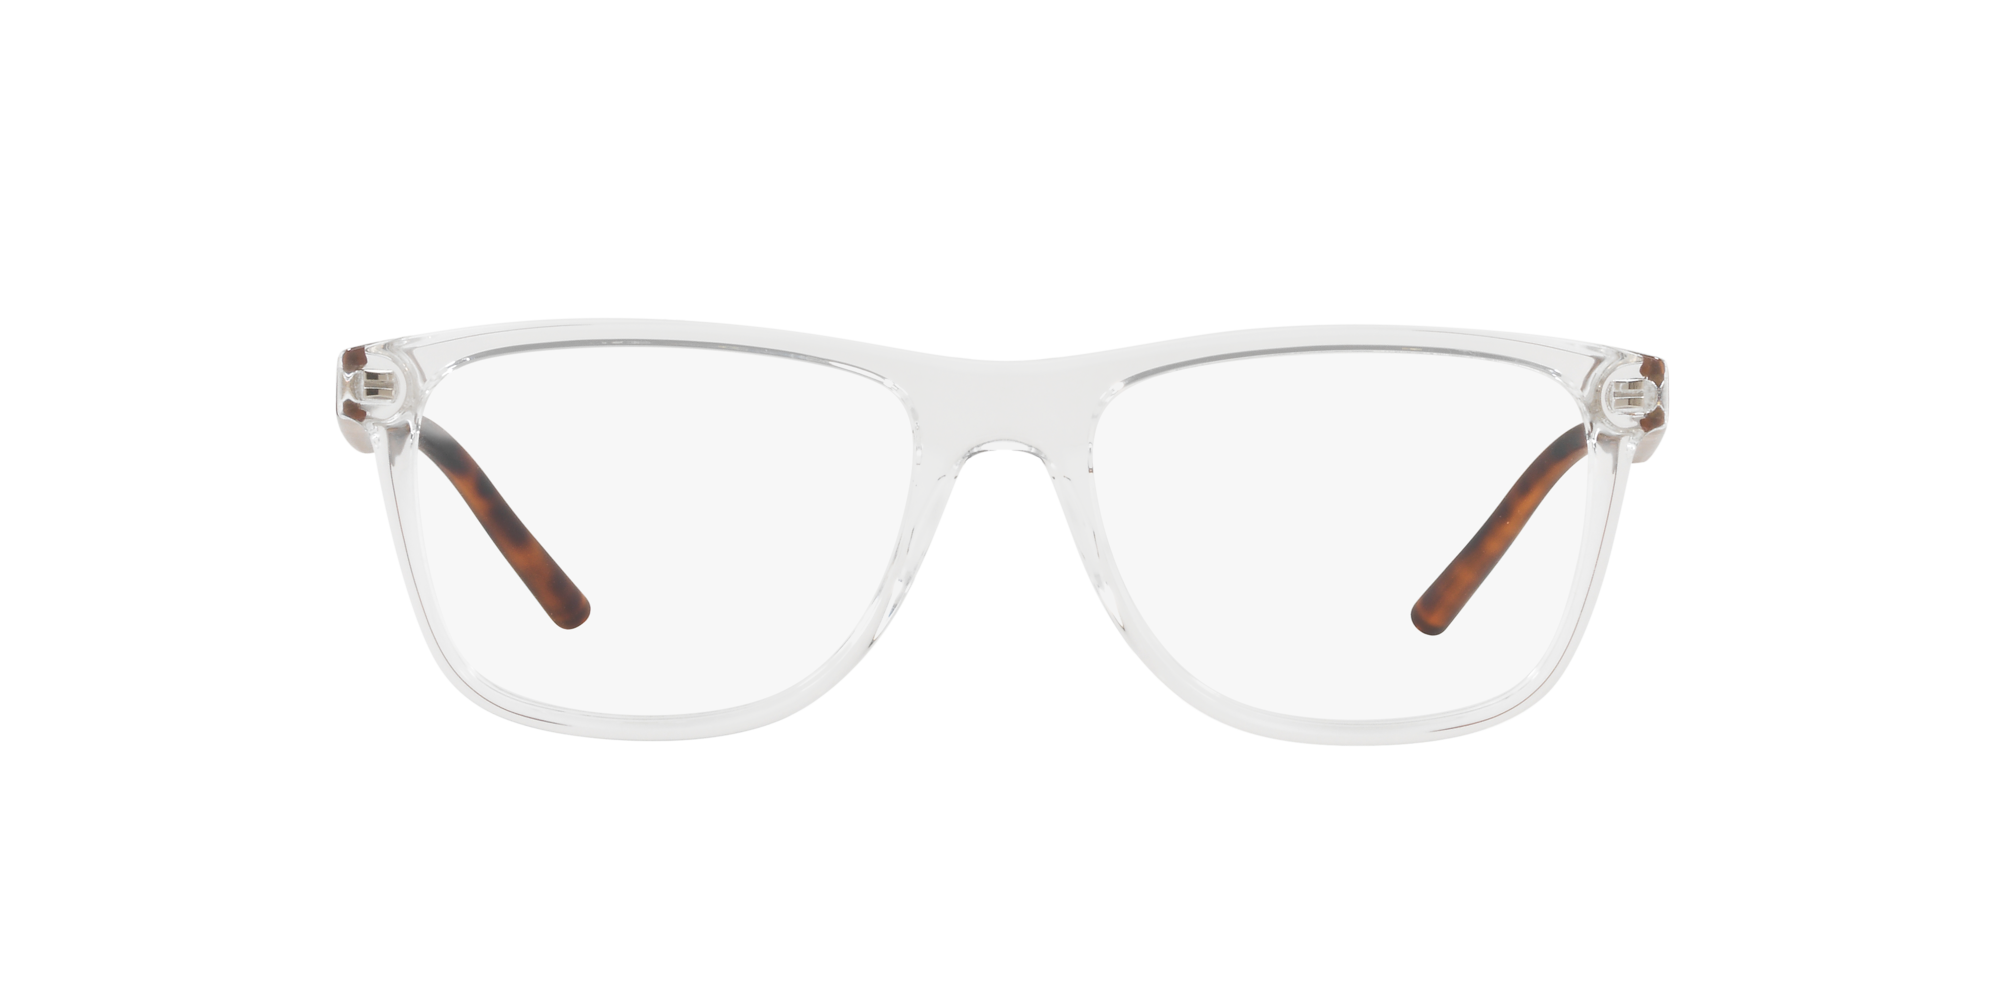 Clear/white glasses | Target Optical